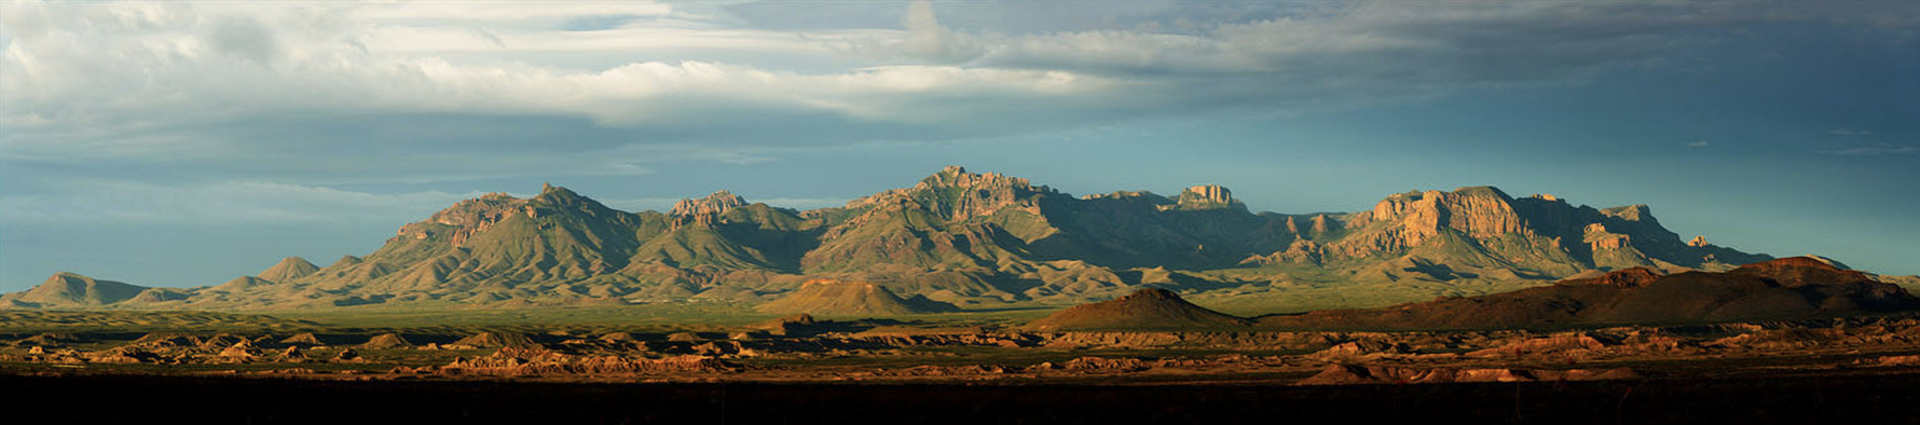 Chisos from Old Ore Road Panoramic by James H. Evans